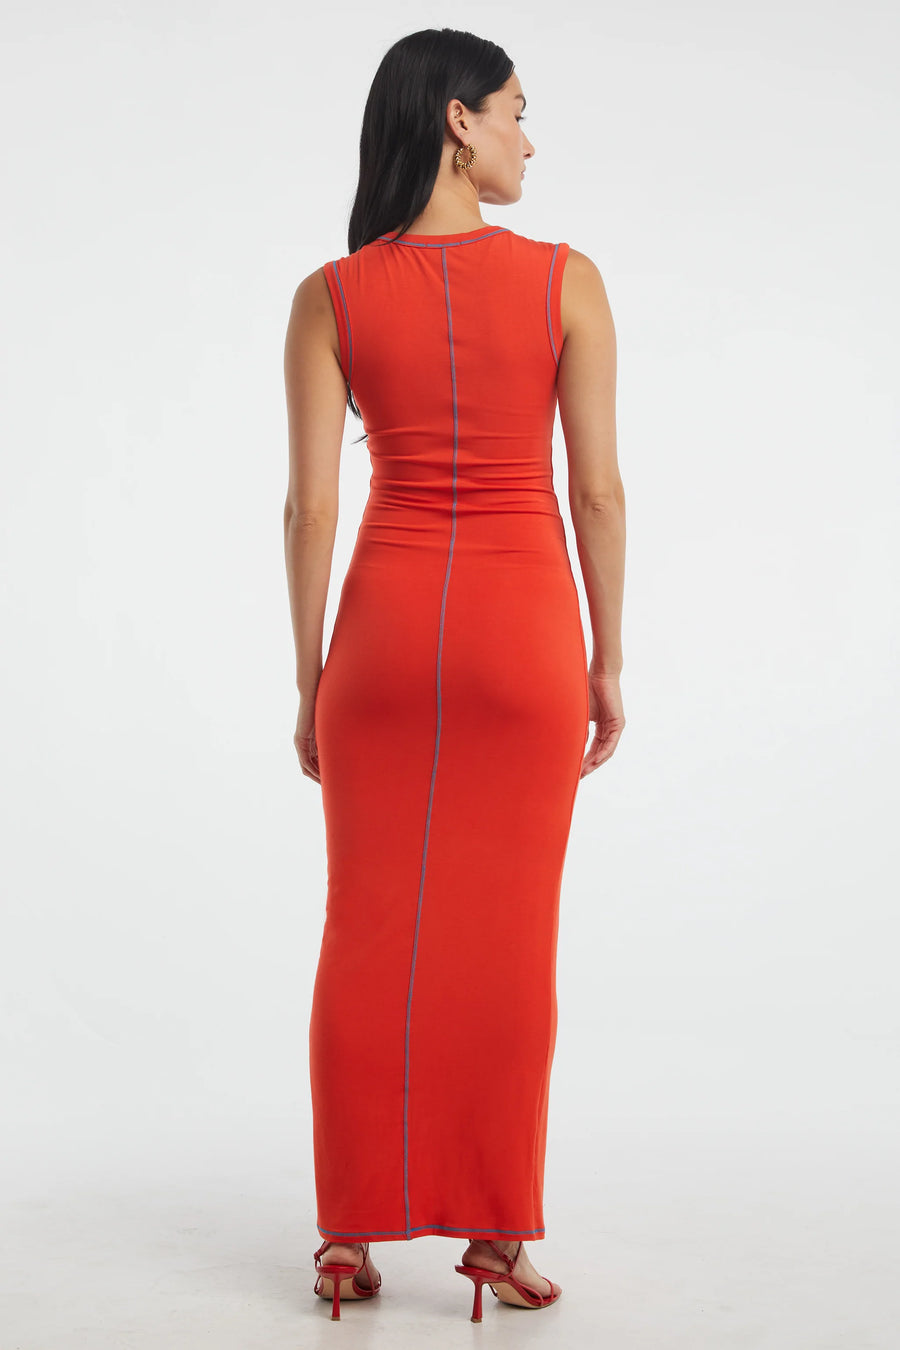 The Line By K Inez Dress - Persimmon